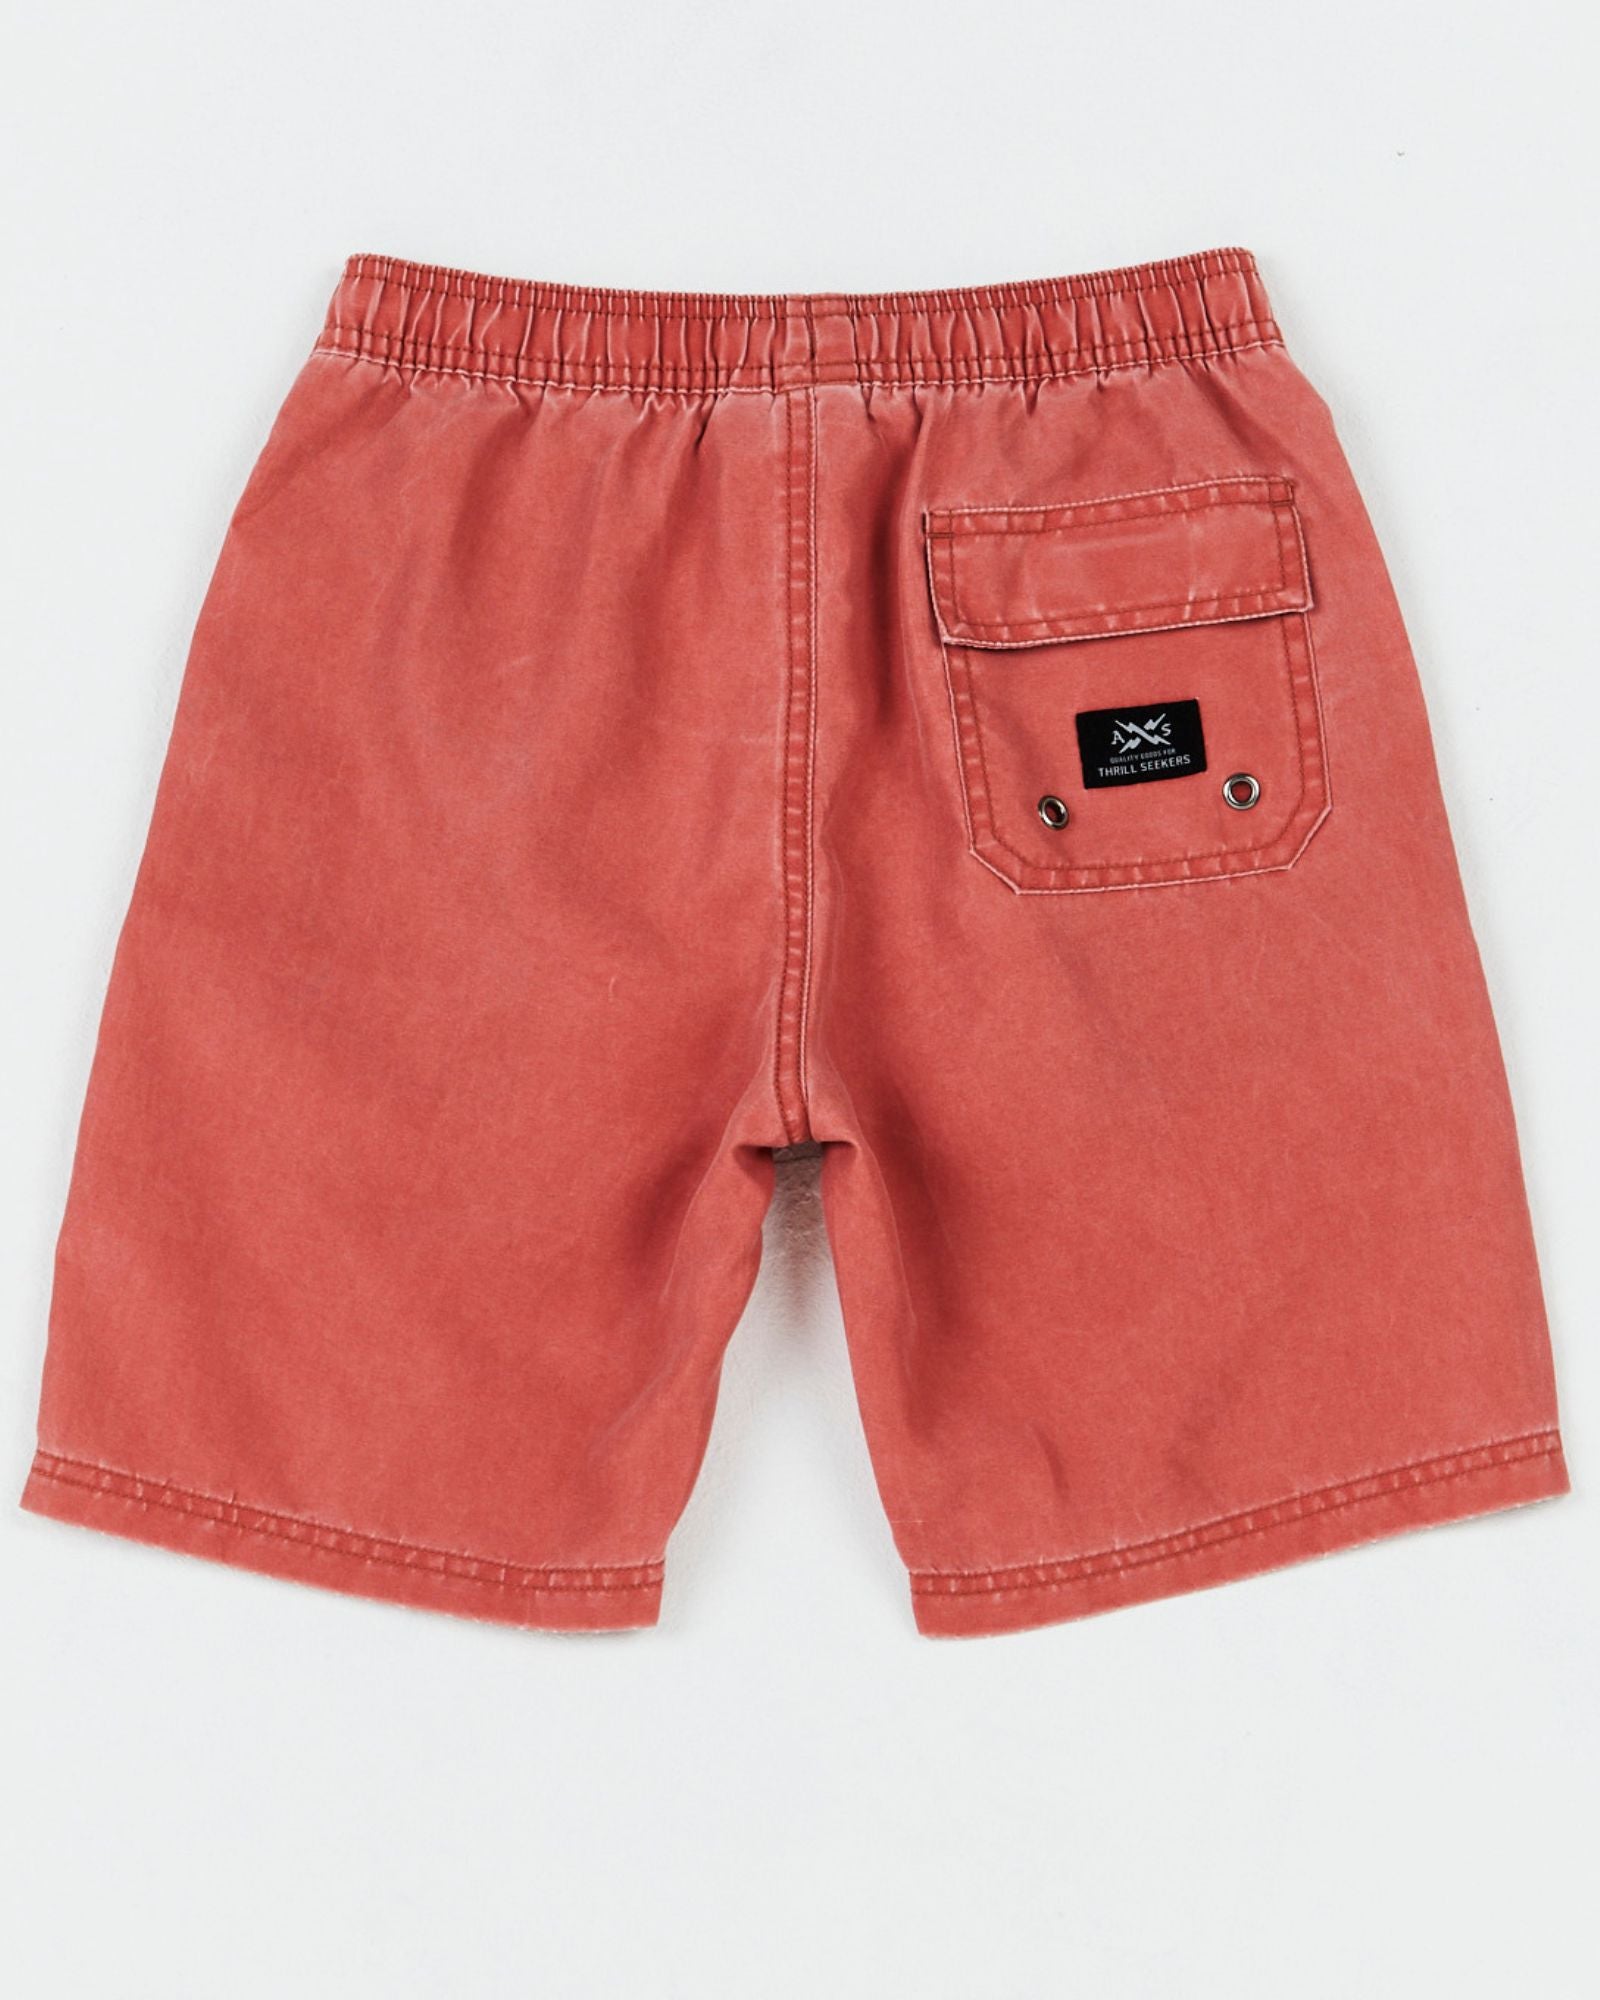 Alphabet Soup's Kids Go To Beach Shorts for boys aged 2 to 7 are crafted with quick-dry, non-stretch polyester. Two mesh-lined pockets and a velcro back pocket store all his summer essentials. A logo badge and woven patch complete the look.